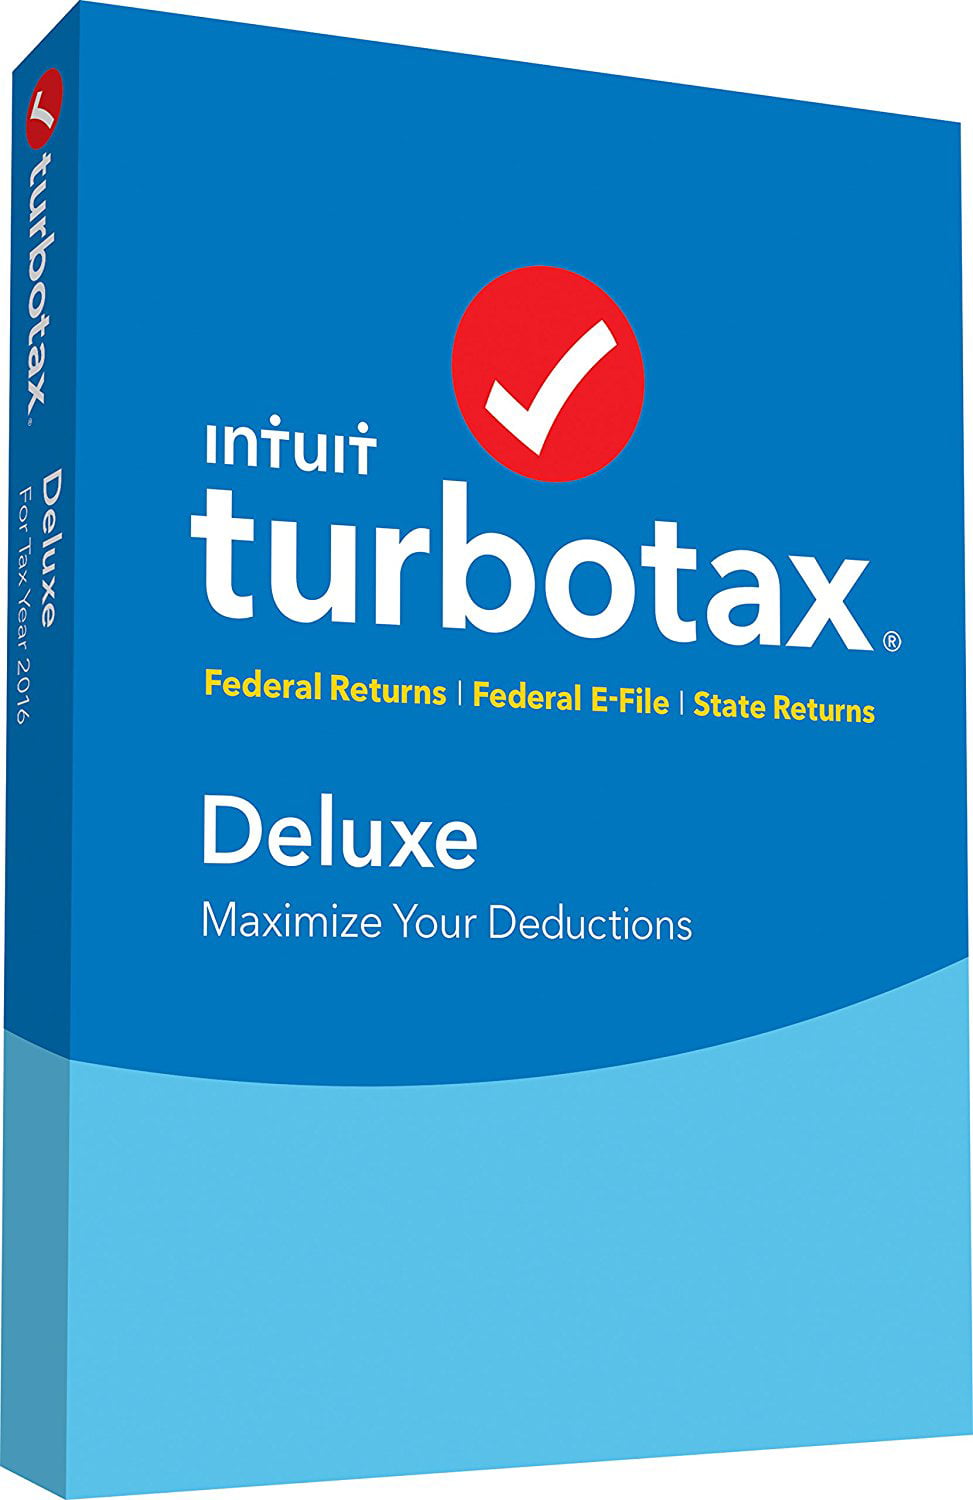 turbotax deluxe free trial